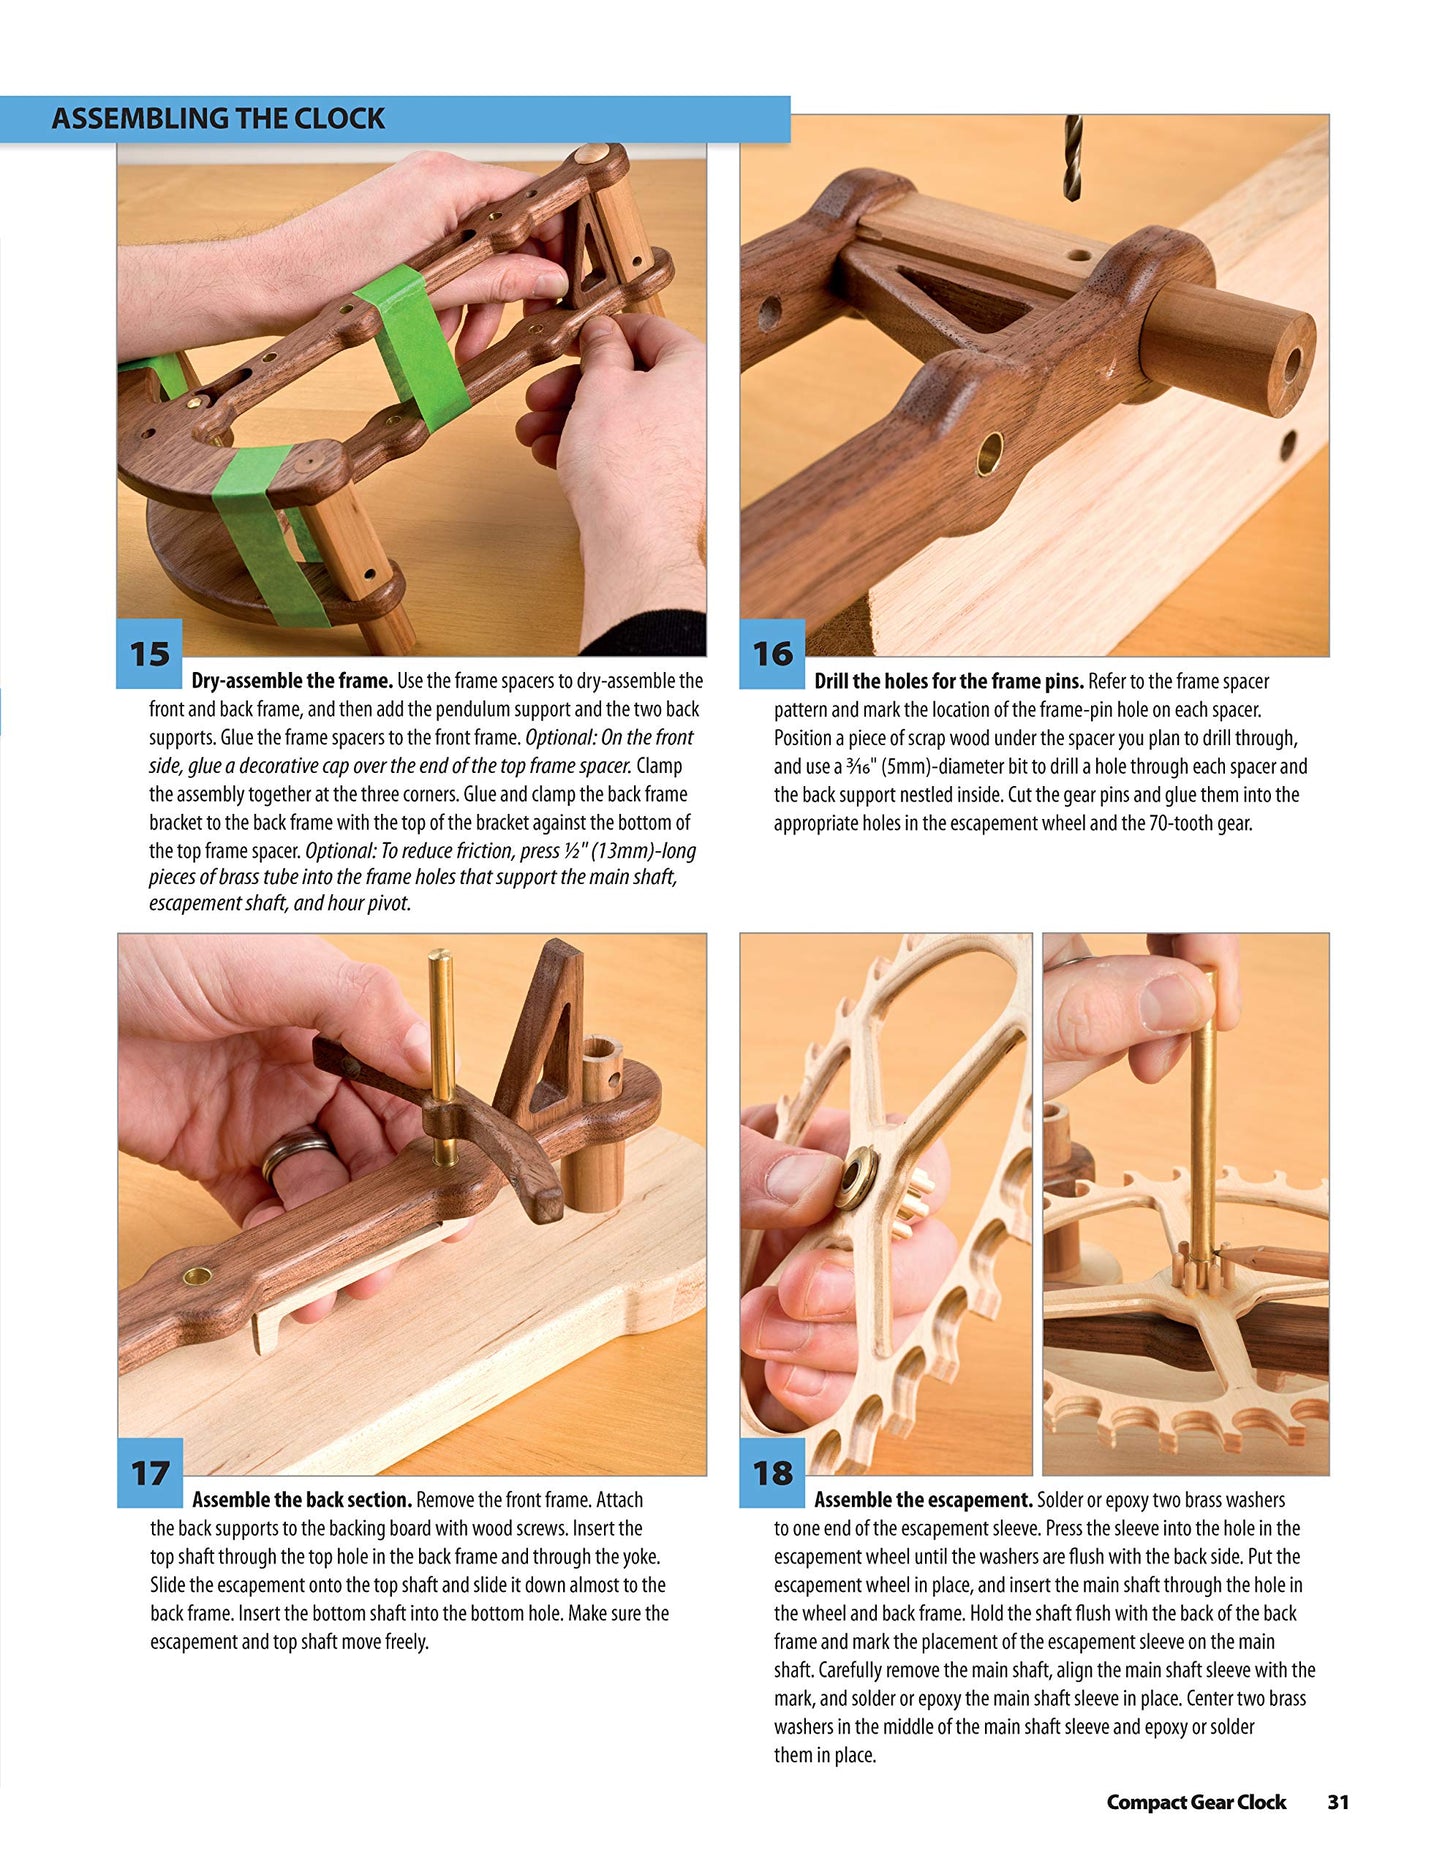 Making Wooden Gear Clocks: 6 Cool Contraptions That Really Keep Time (Fox Chapel Publishing) Step-by-Step Projects for Handmade Clocks, from Beginner